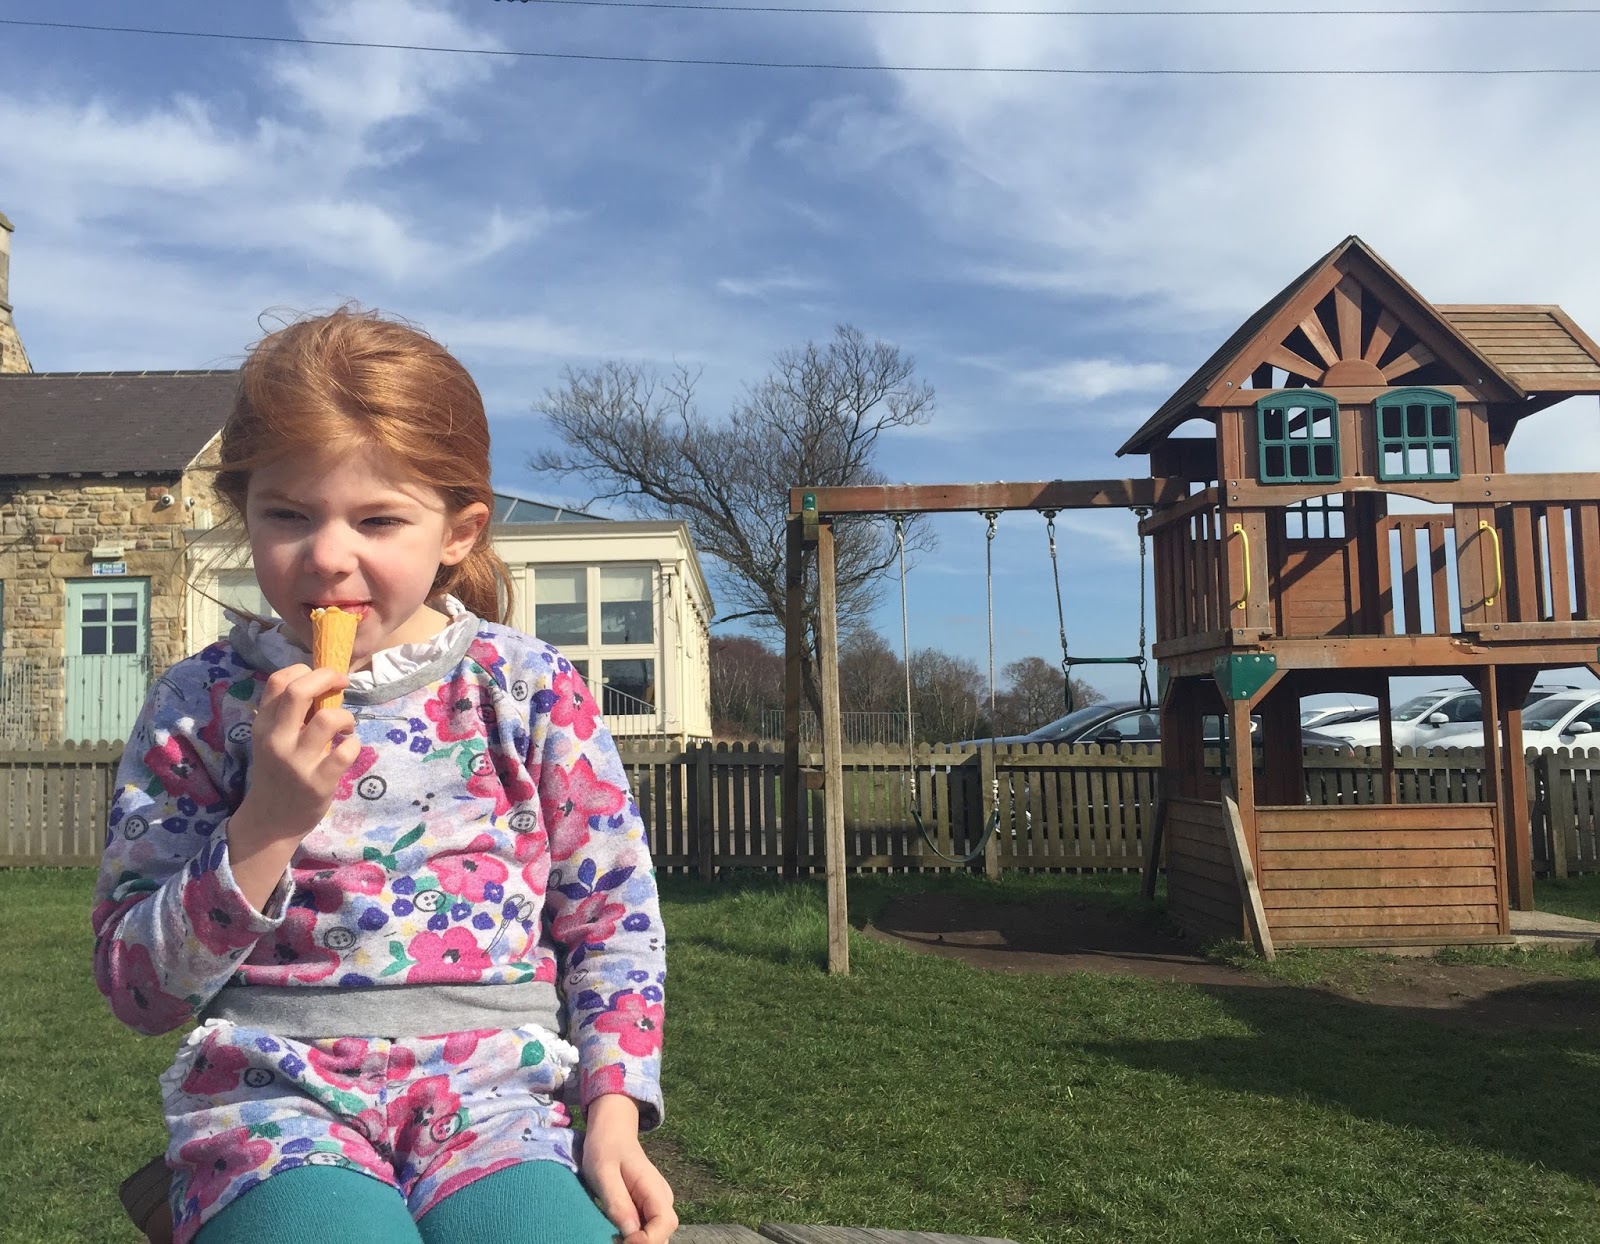 Fish & Chips Friday at Black Horse, Beamish - outdoor play area